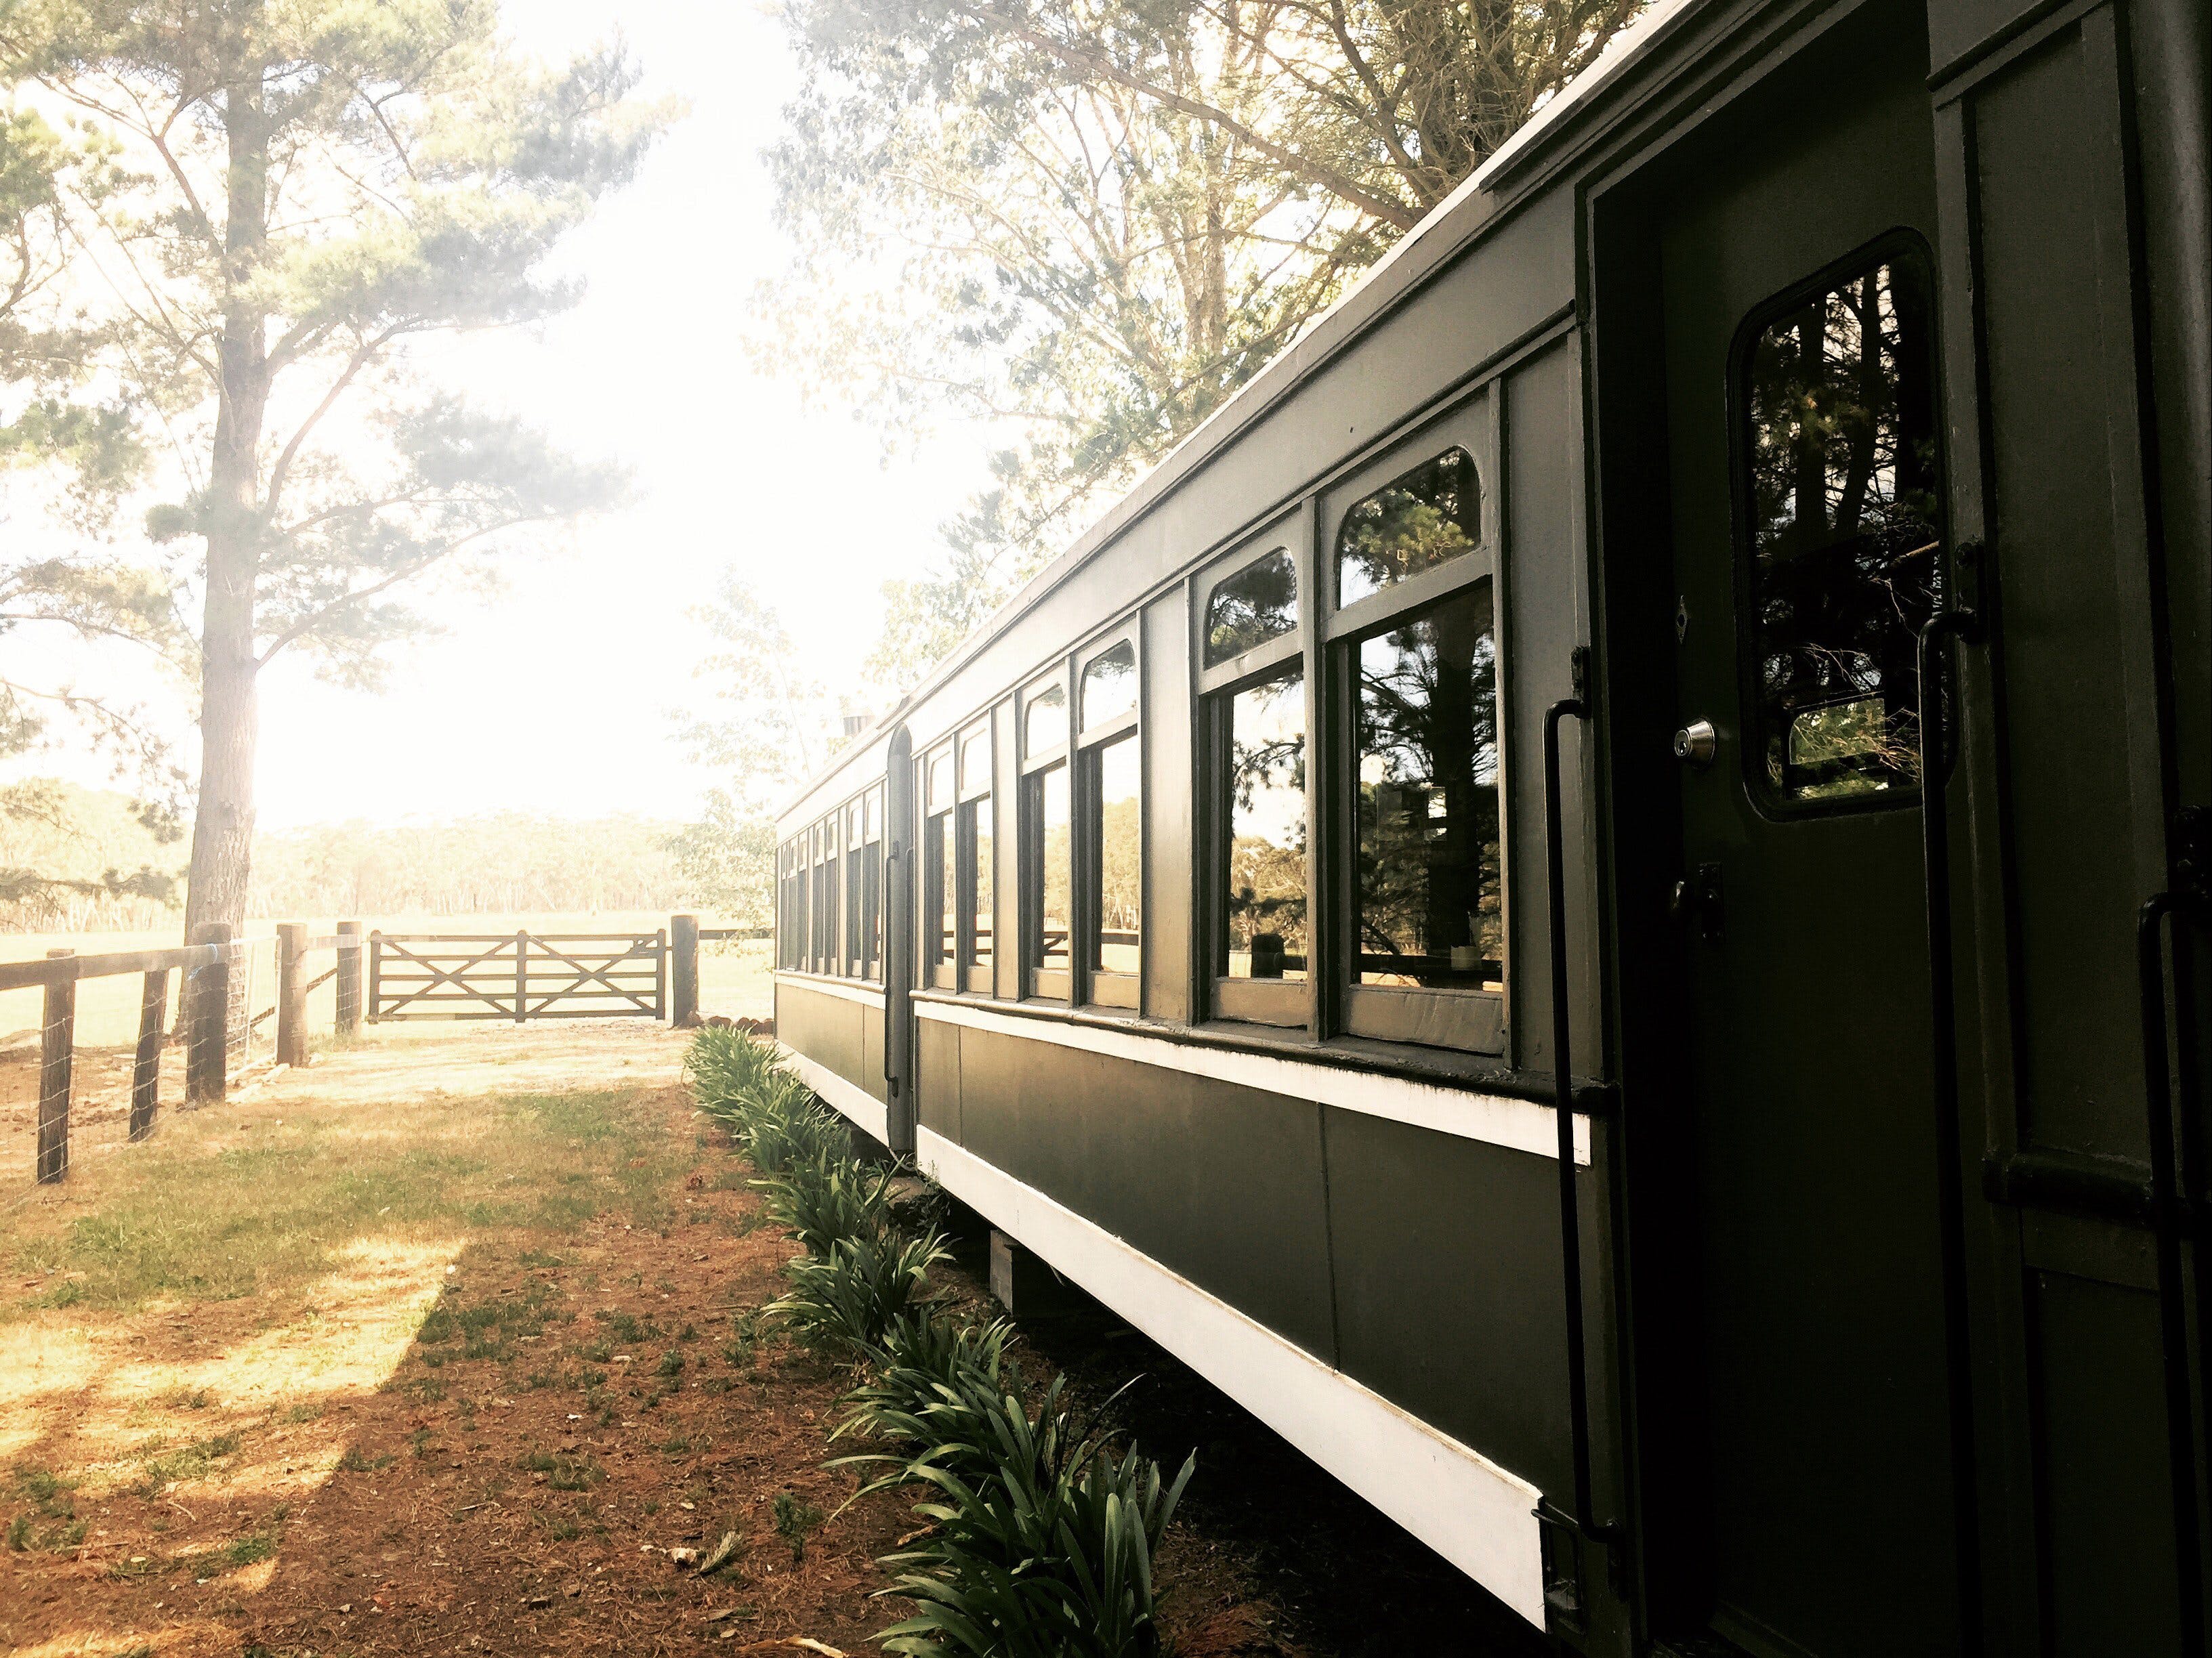 Redleaf Farm Carriages - Accommodation Nelson Bay